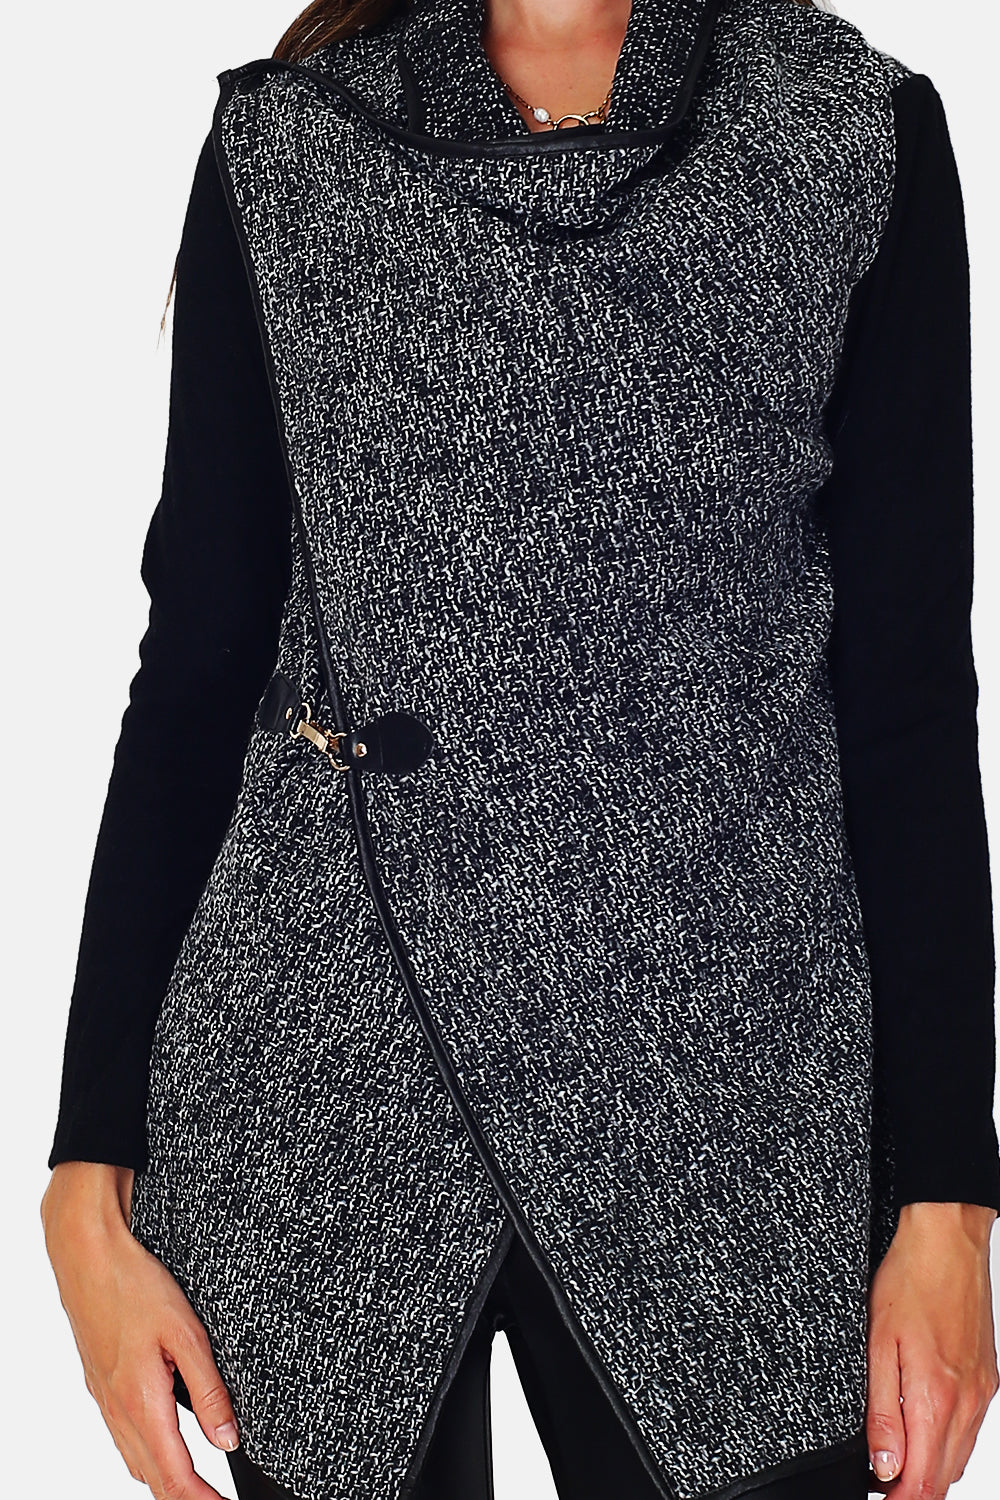 Asymmetrical mid-length cardigan with long sleeves in heather